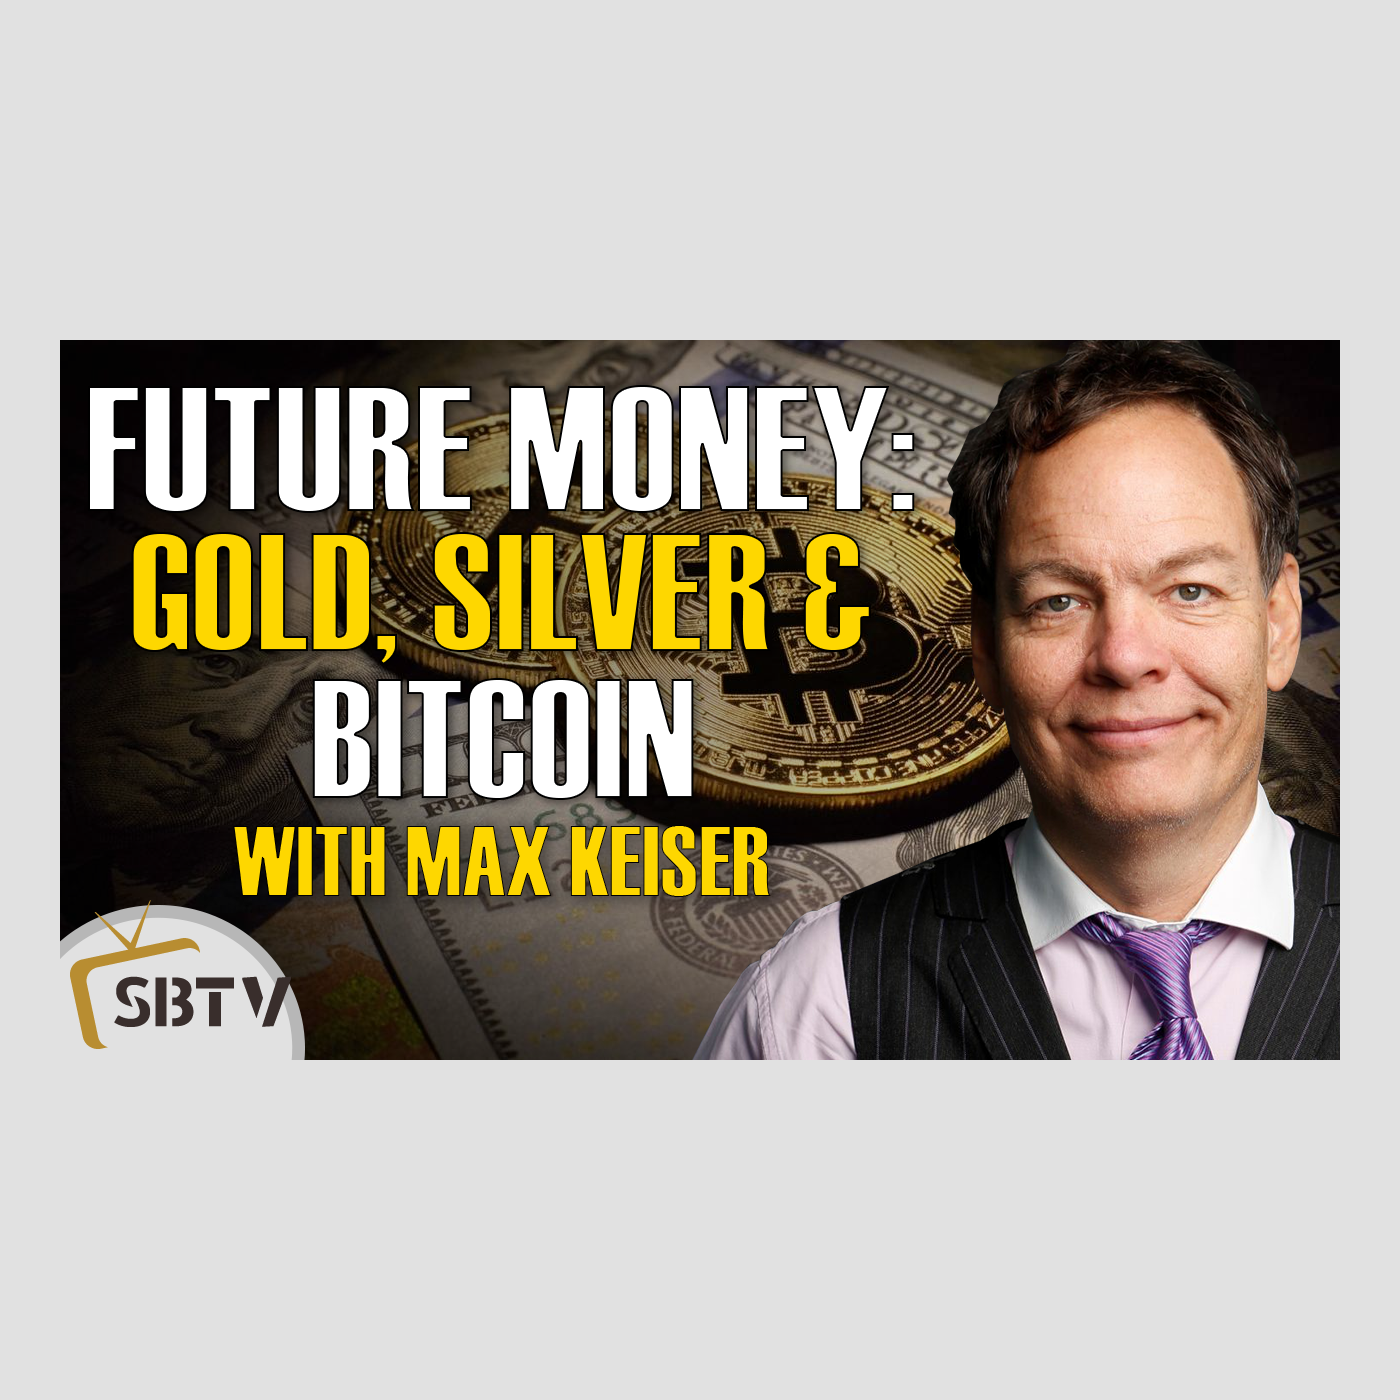 133 Max Keiser - Future of Money is Gold, Silver and Bitcoin